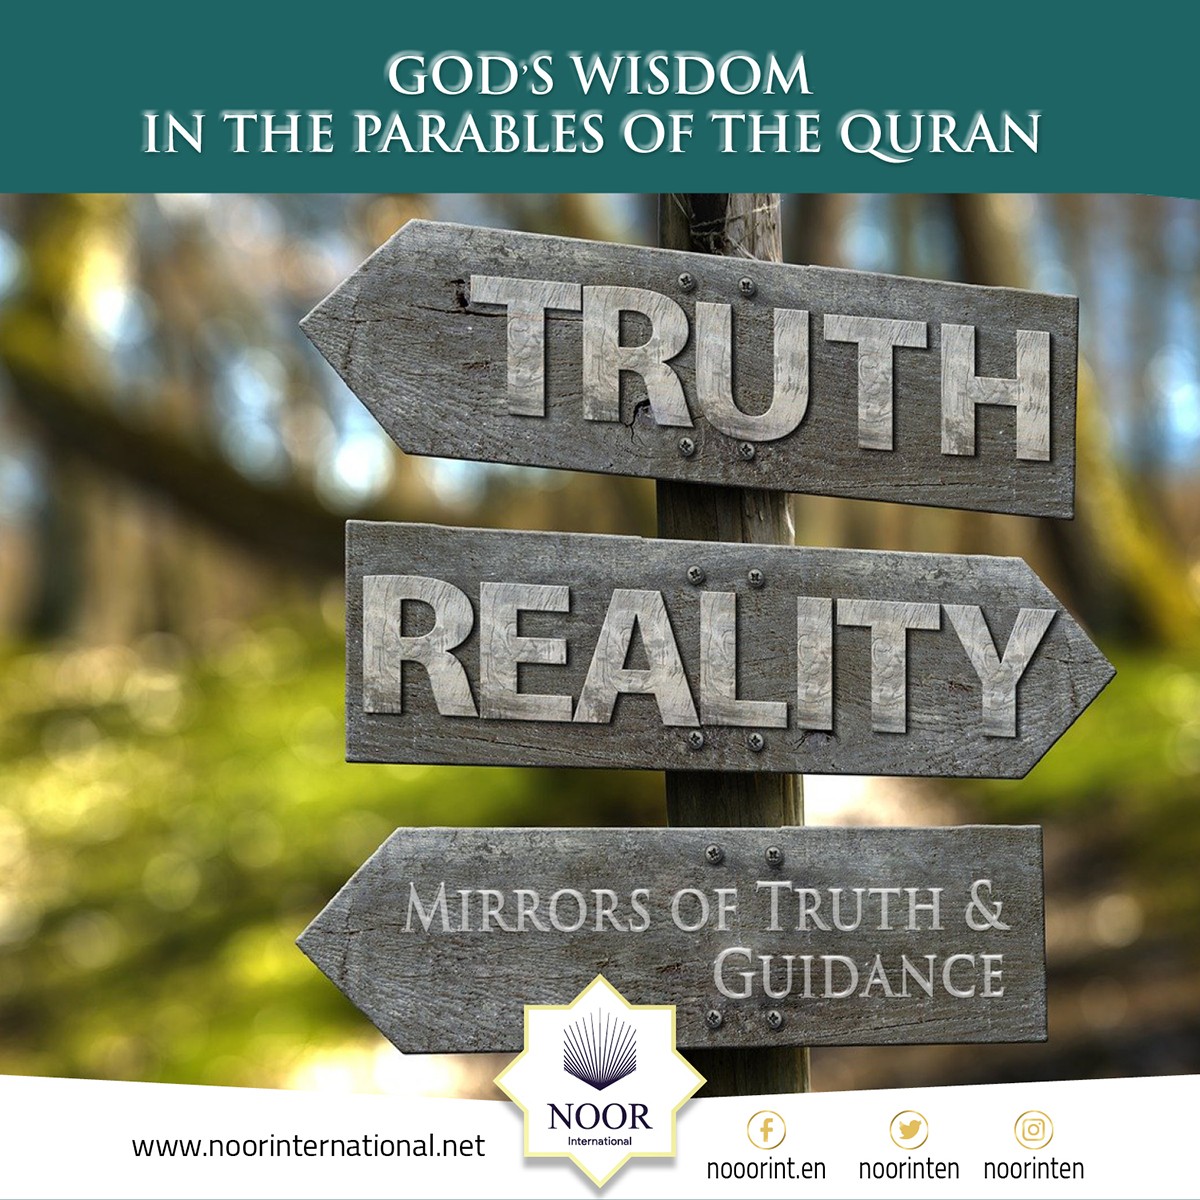 God's wisdom in the parables of the Quran: Explore, reflect, and be guided."